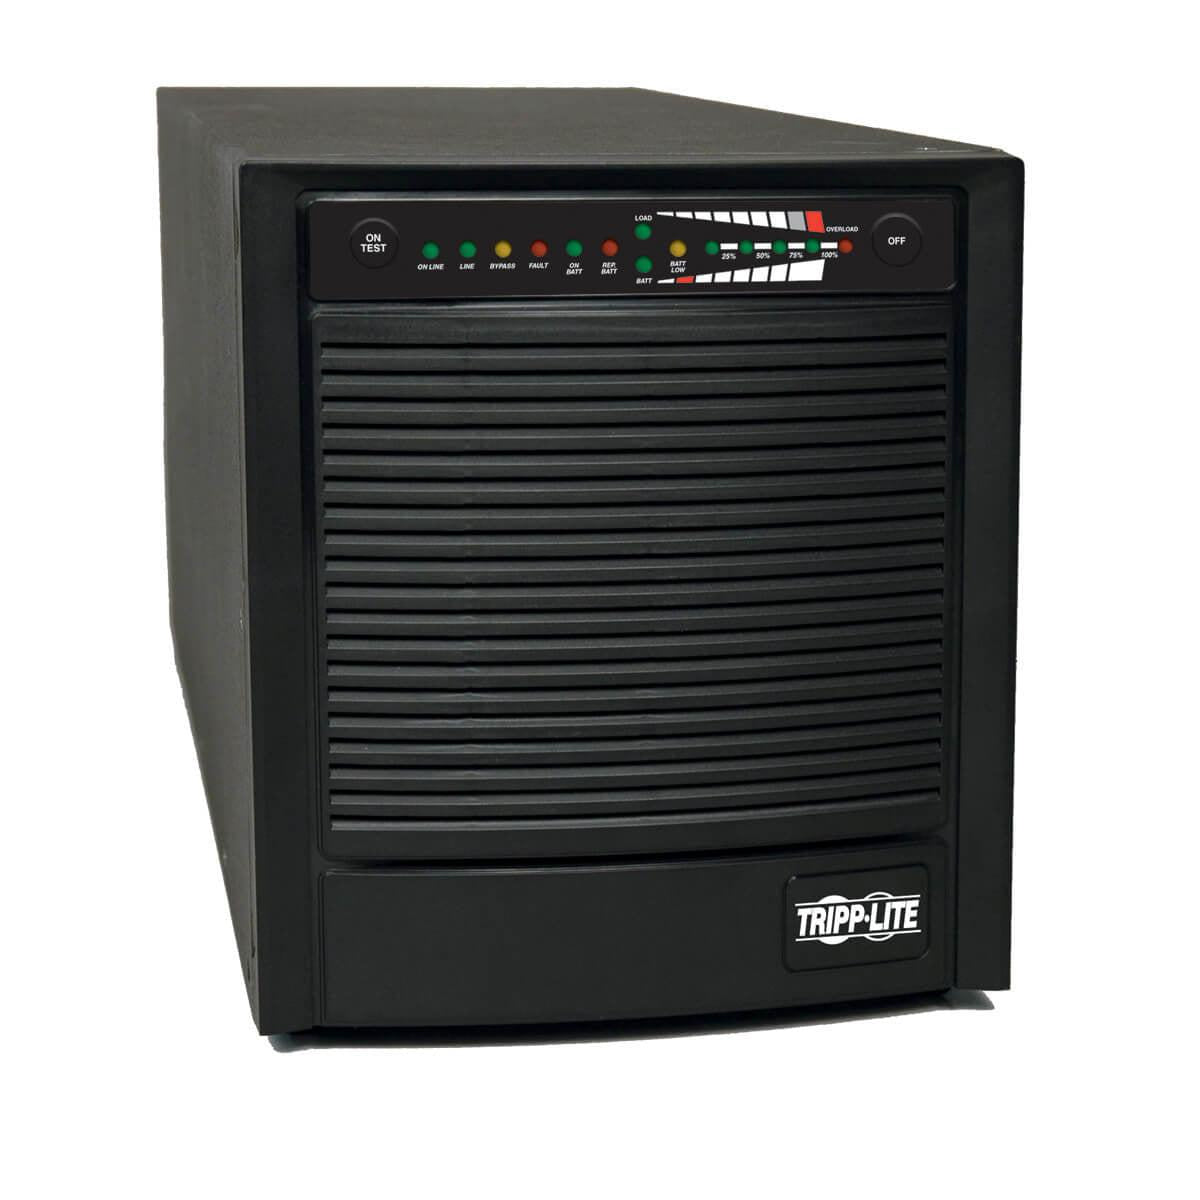 Tripp Lite Smartonline 110-120V 3Kva 2.4Kw On-Line Double-Conversion Ups, Extended Run, Snmp, Webcard, Tower, Usb, Db9 Serial